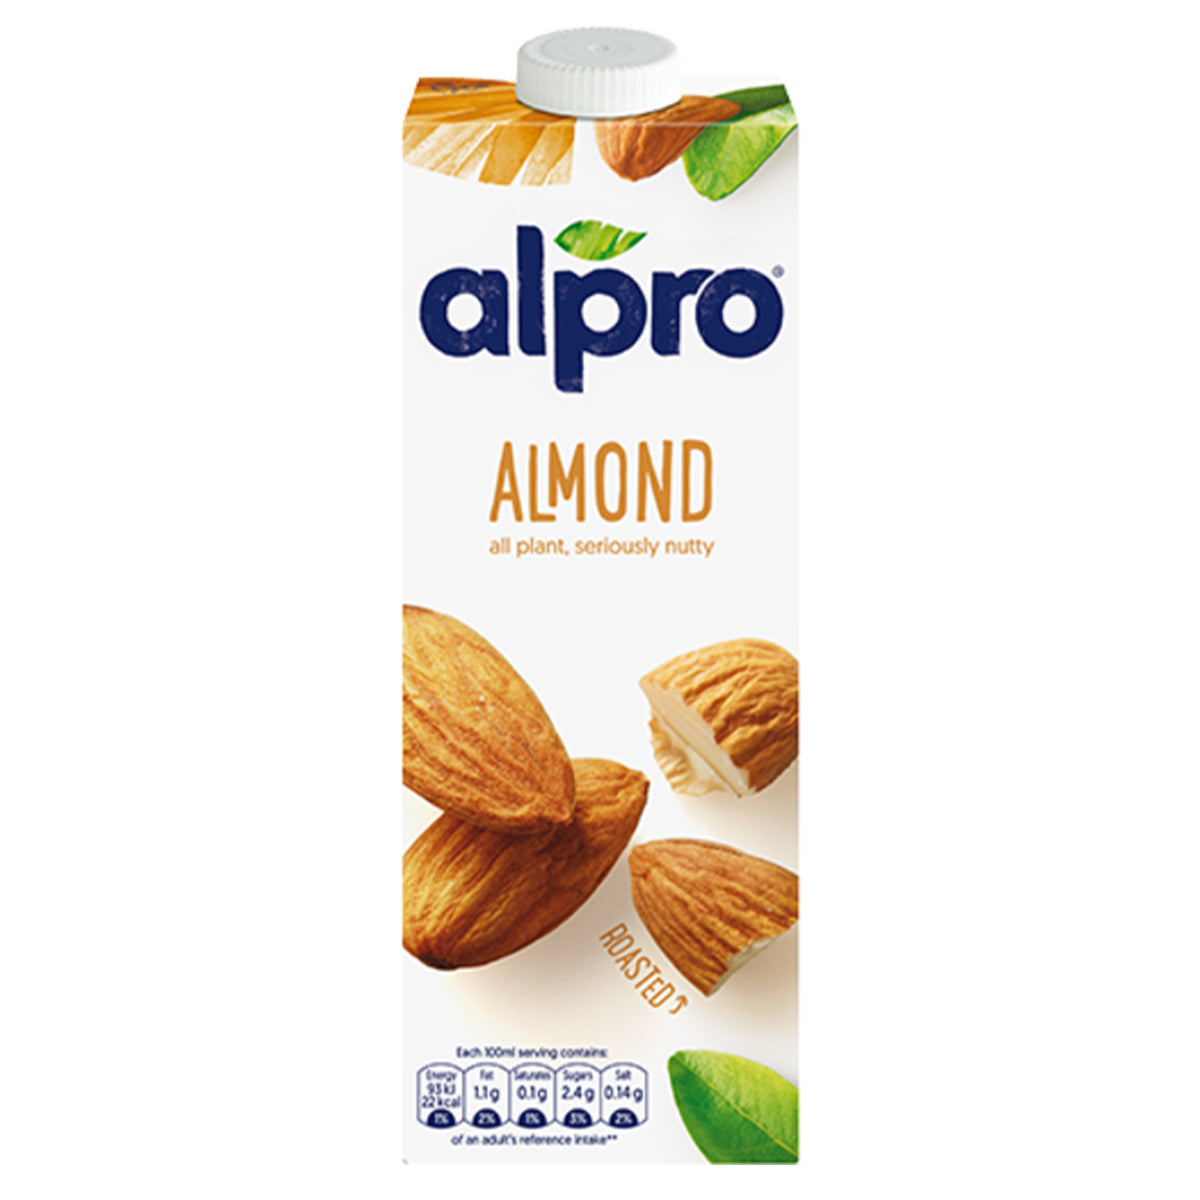 A carton of Alpro - Almond 1L on a white background.